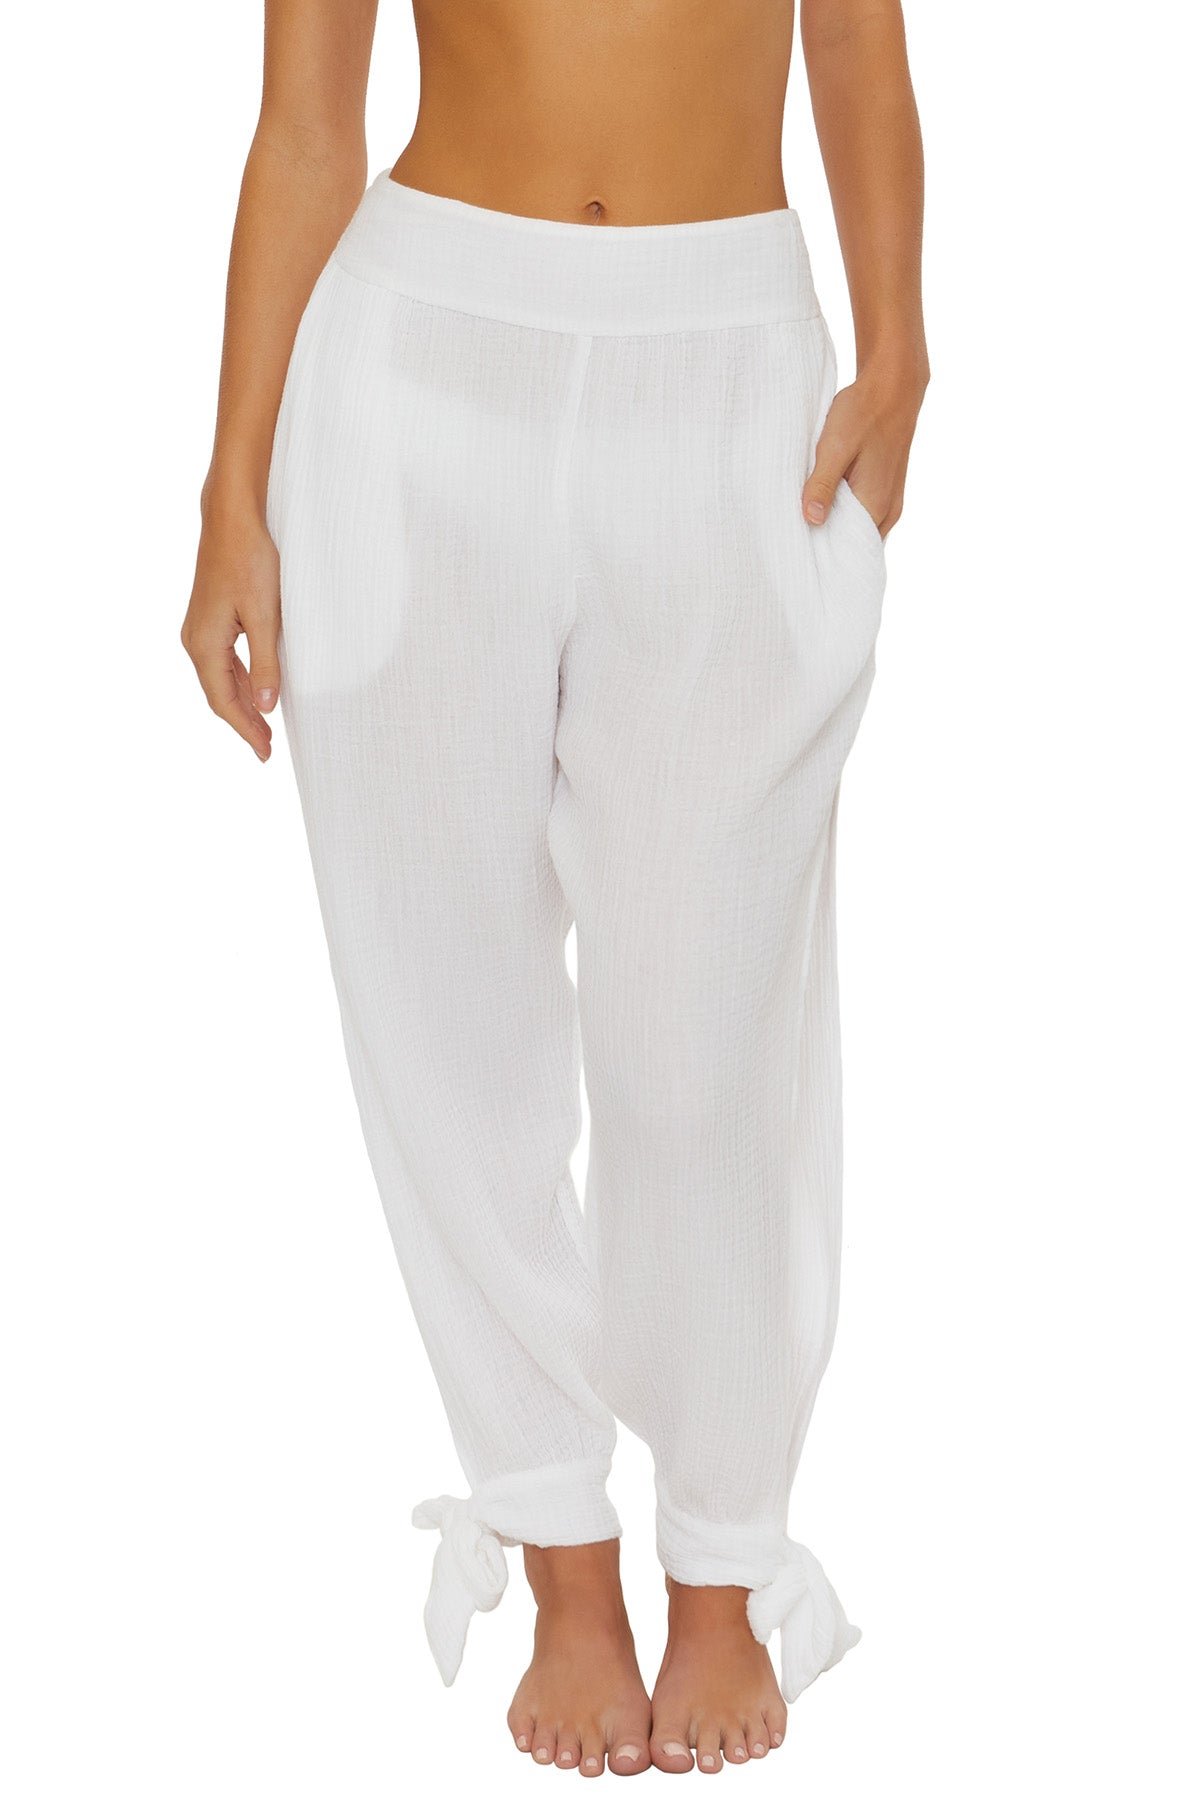 DAYDREAMER TIE PANT